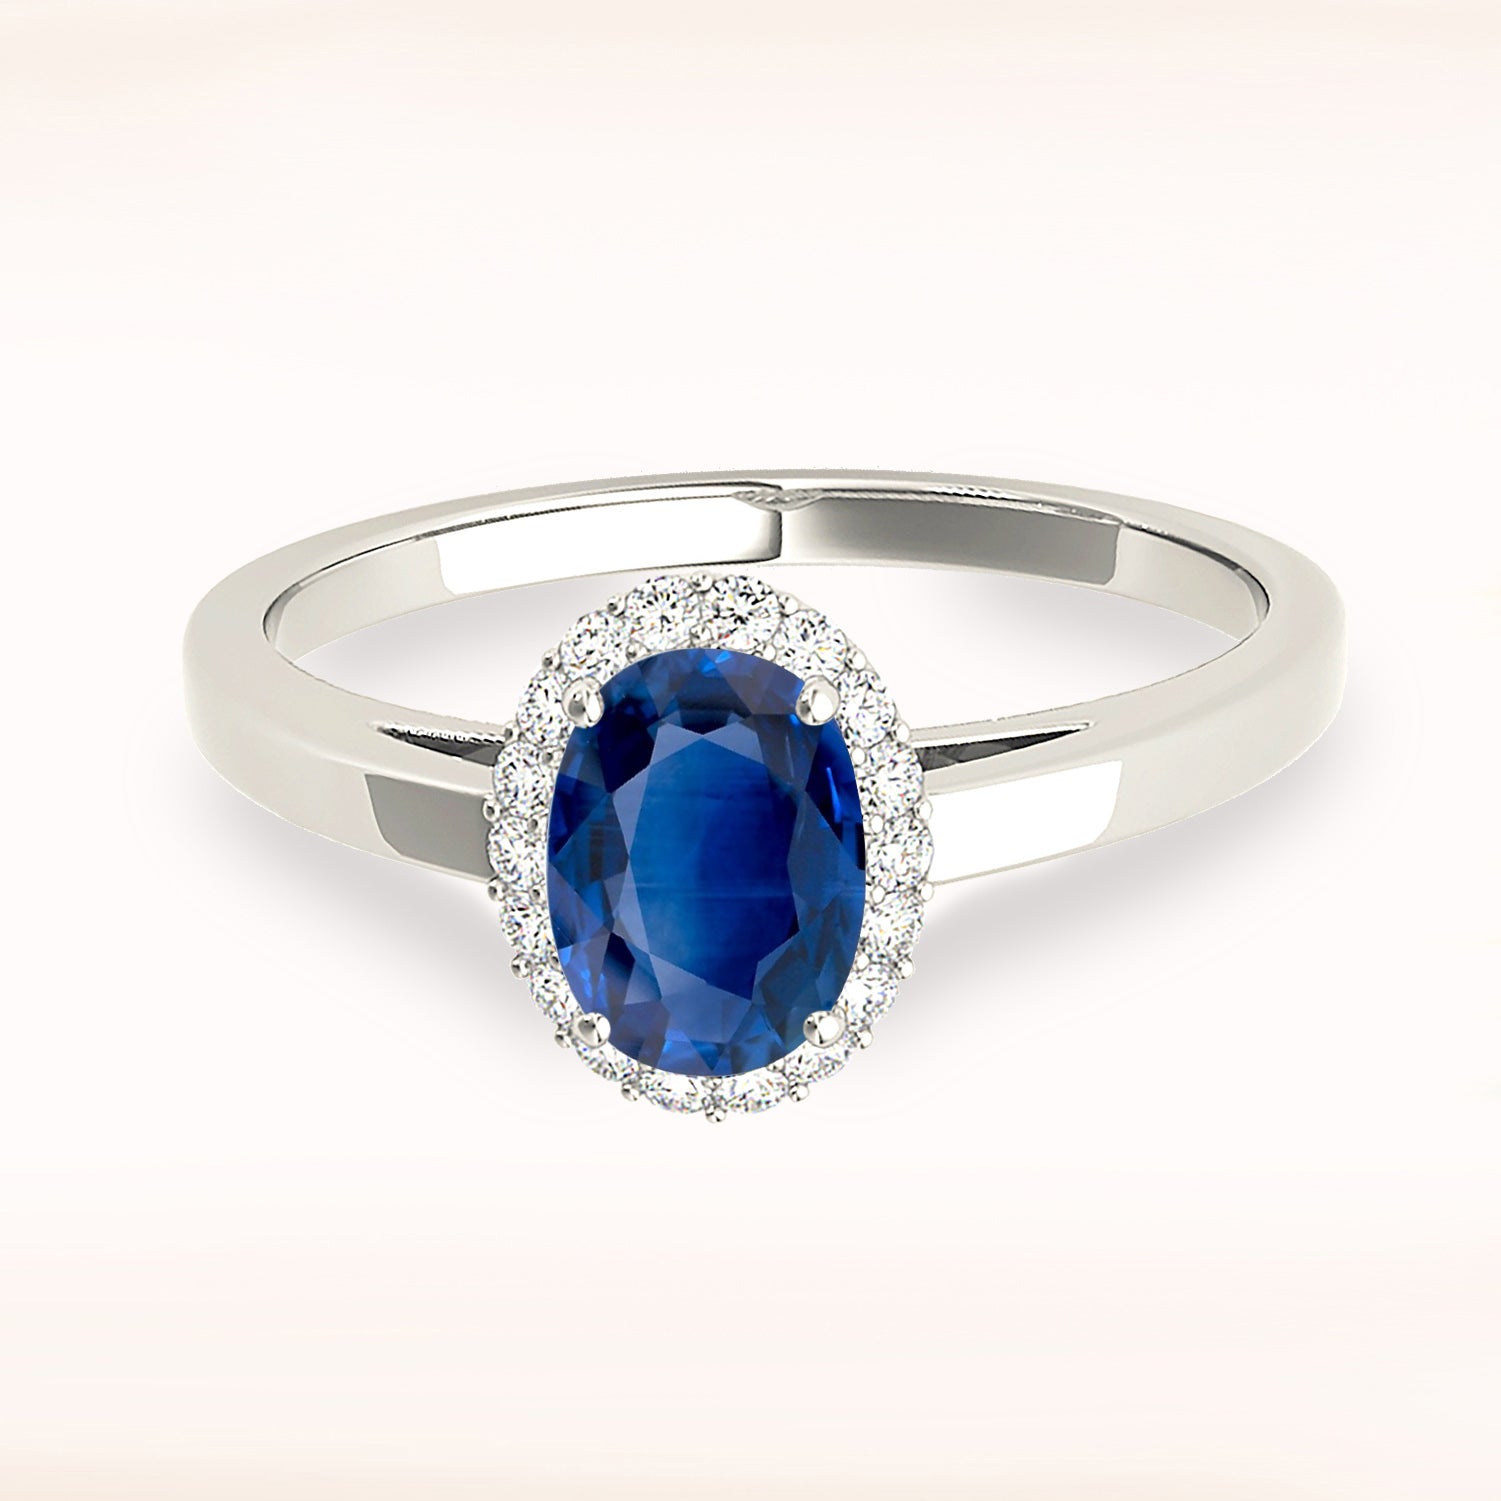 1.51 ct. Genuine Blue Oval Sapphire Ring With 0.20 ctw. Diamond Halo, Solid Gold Band | Natural Sapphire And Diamond Gemstone Ring-in 14K/18K White, Yellow, Rose Gold and Platinum - Christmas Jewelry Gift -VIRABYANI